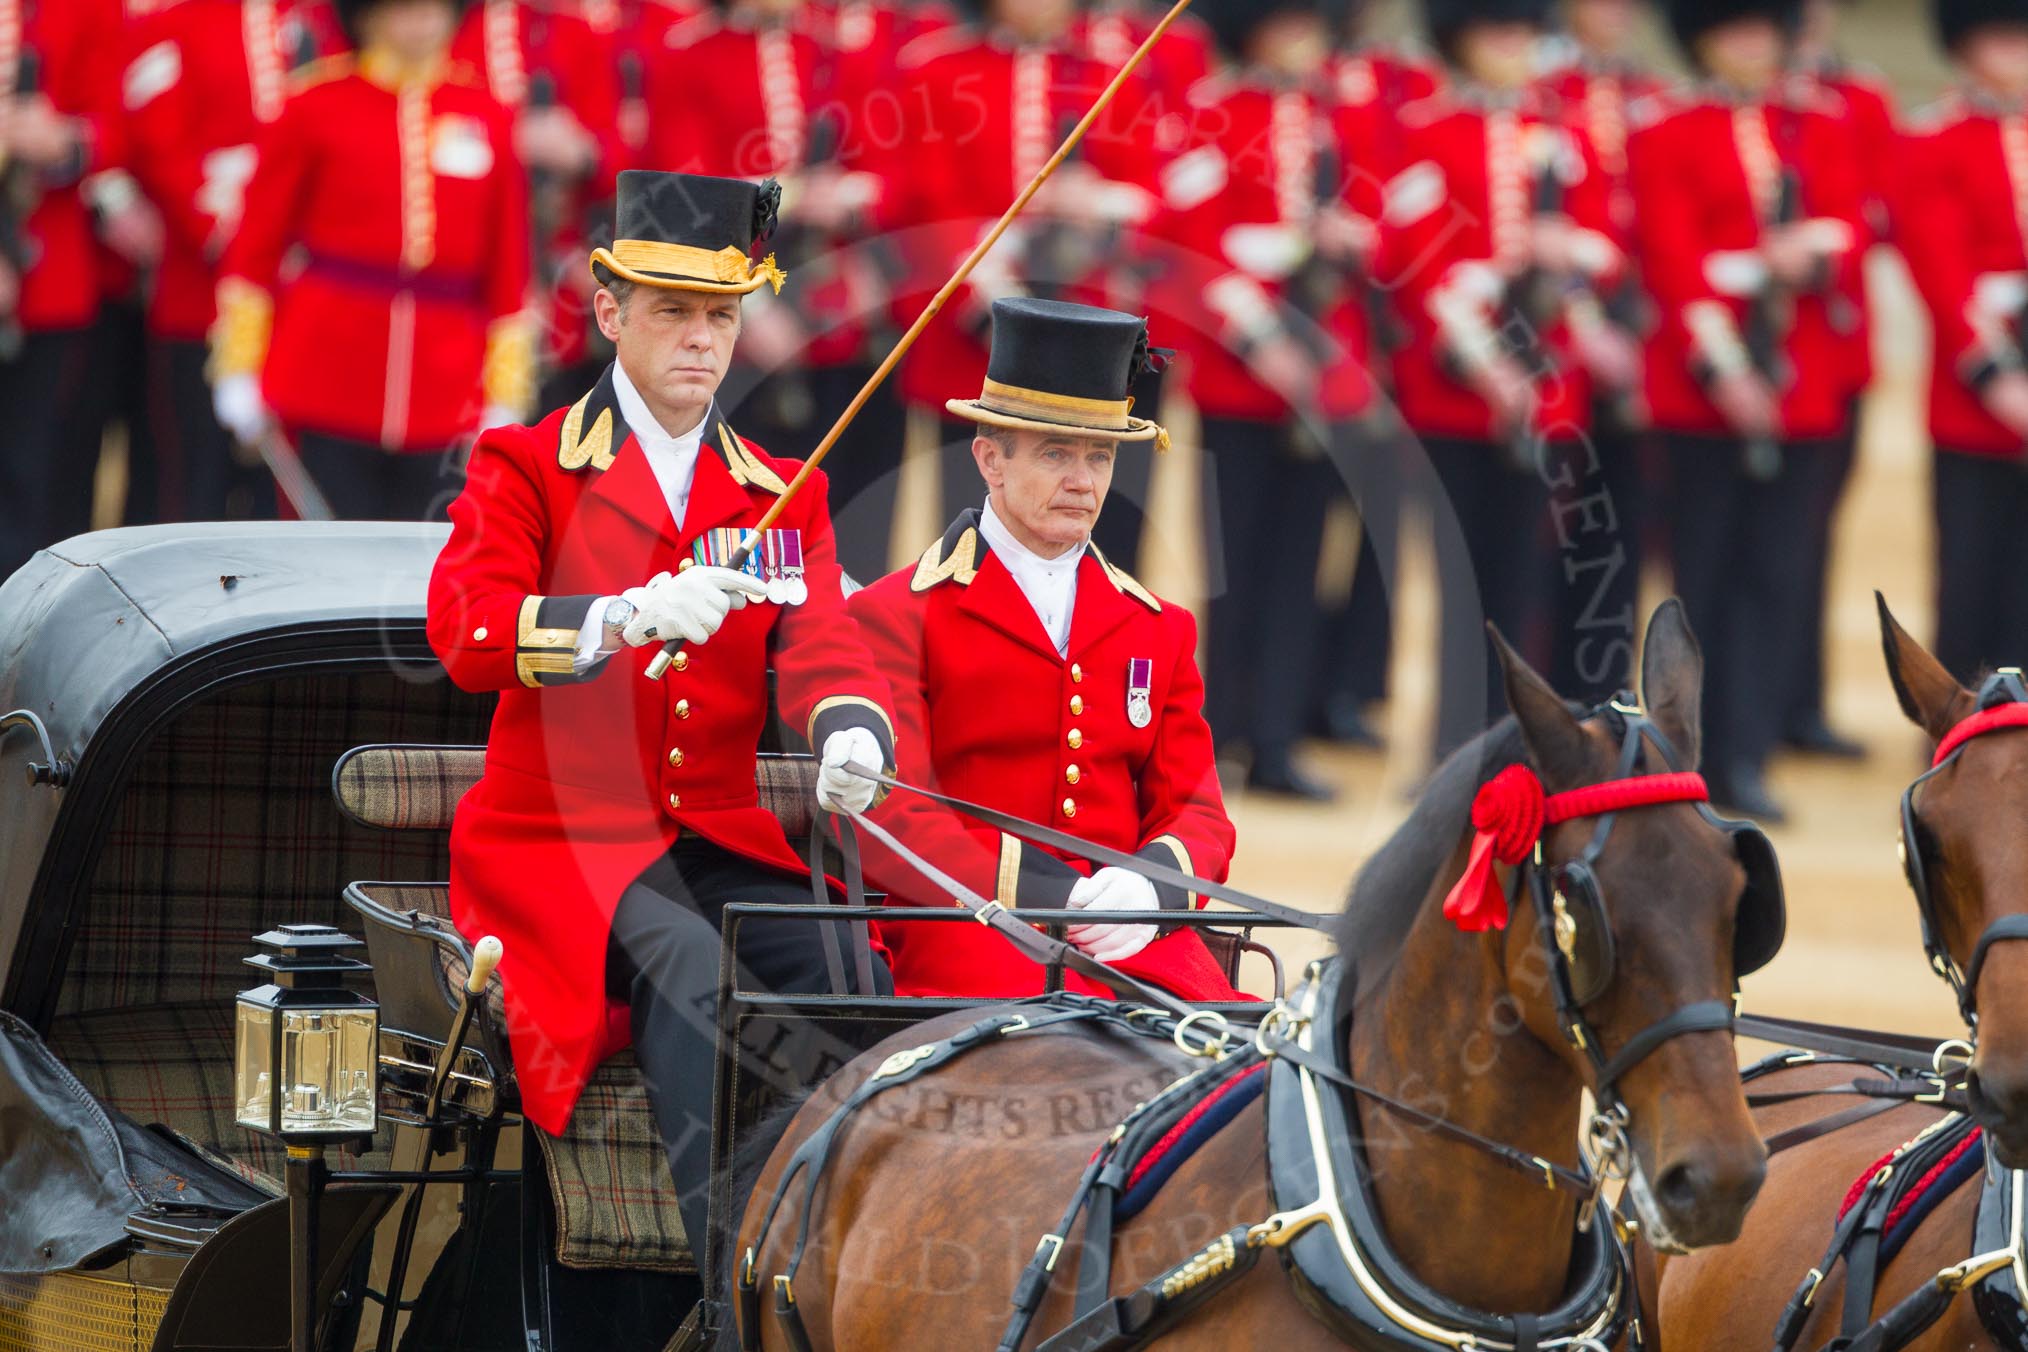 The Colonel's Review 2016.
Horse Guards Parade, Westminster,
London,

United Kingdom,
on 04 June 2016 at 10:52, image #137